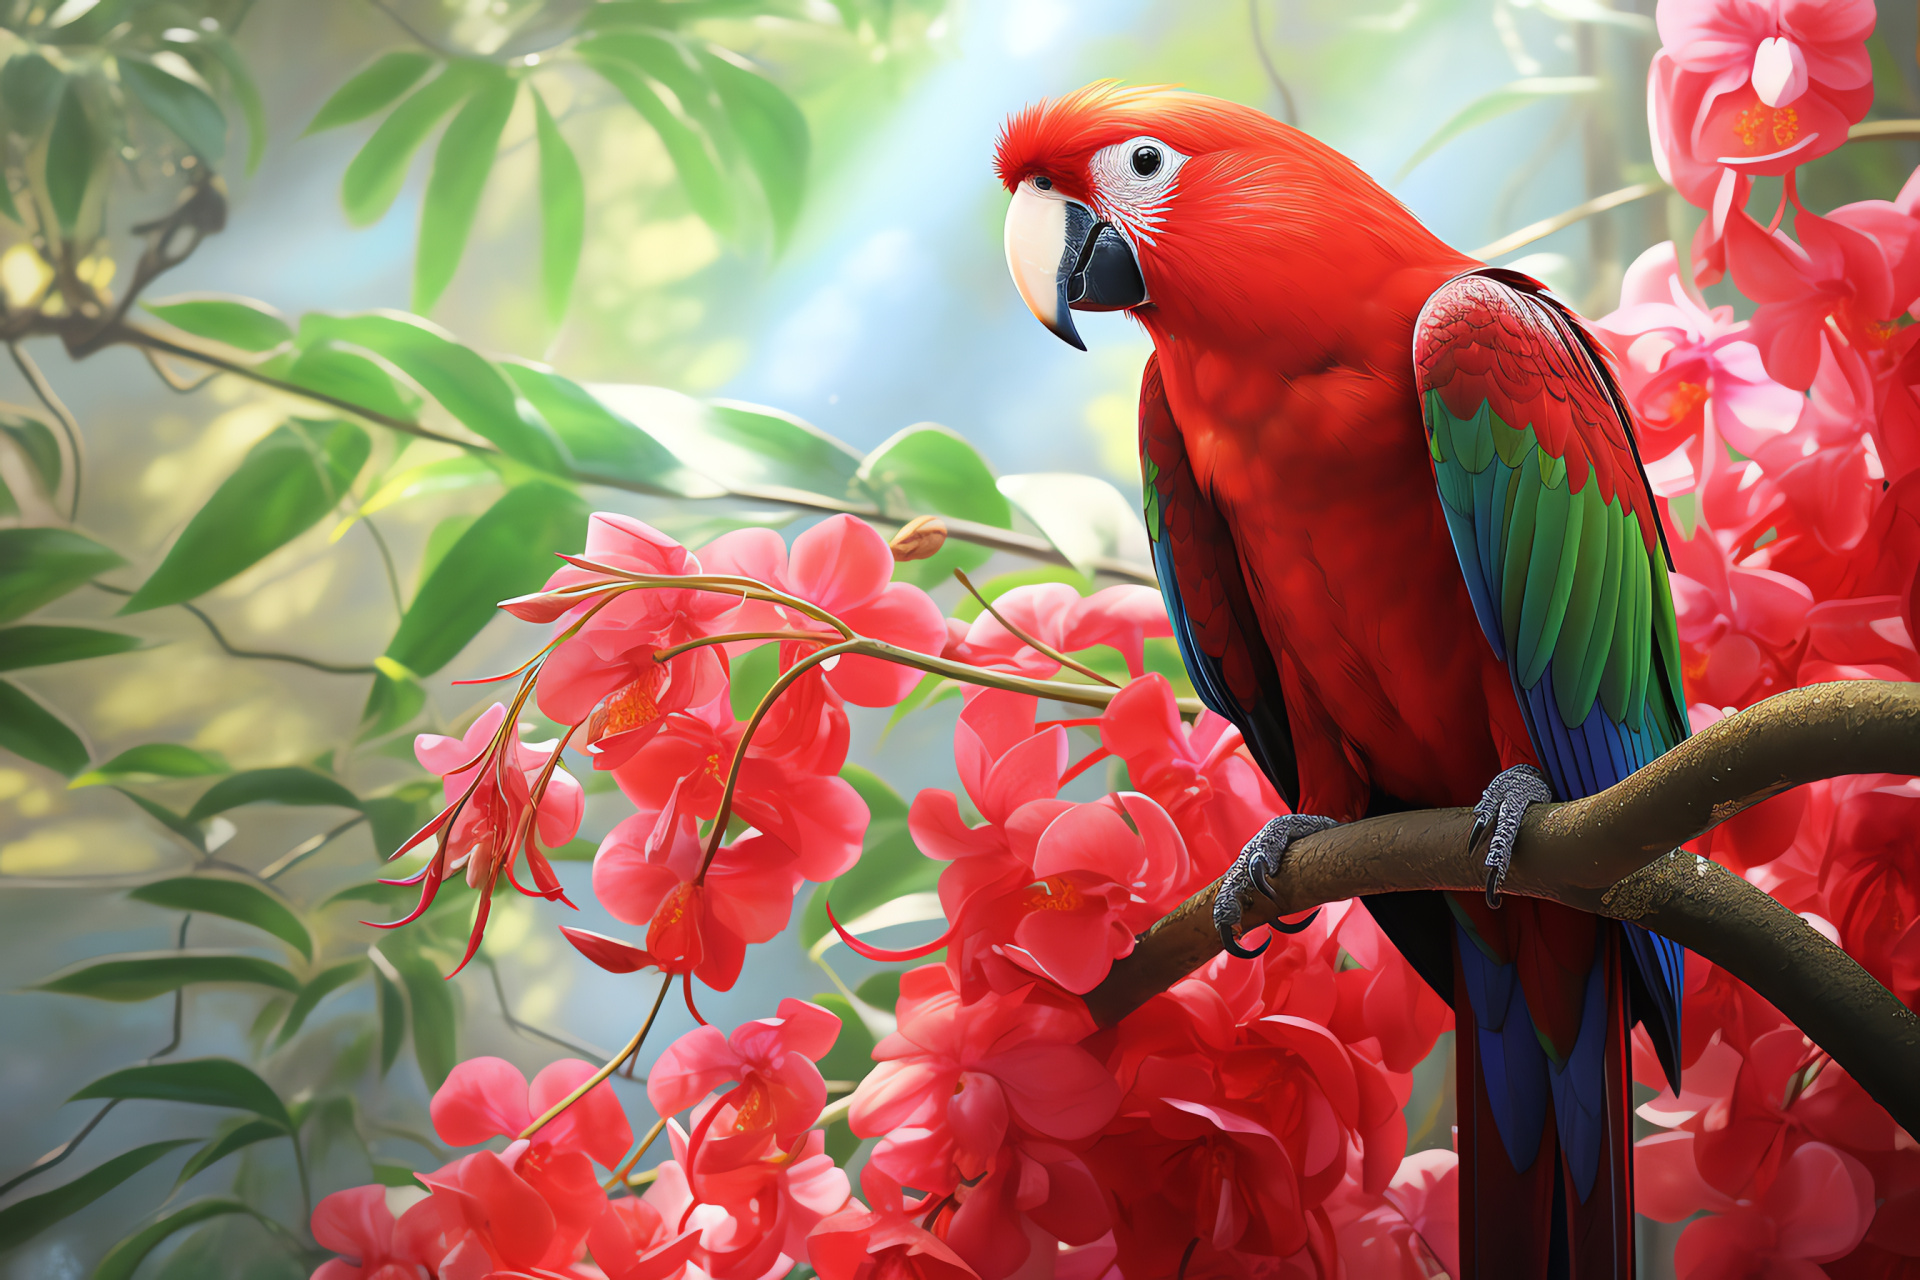 Eclectus parrot, Aviary lush, Red bird plumage, Green feather contrast, Florals vibrant, HD Desktop Wallpaper